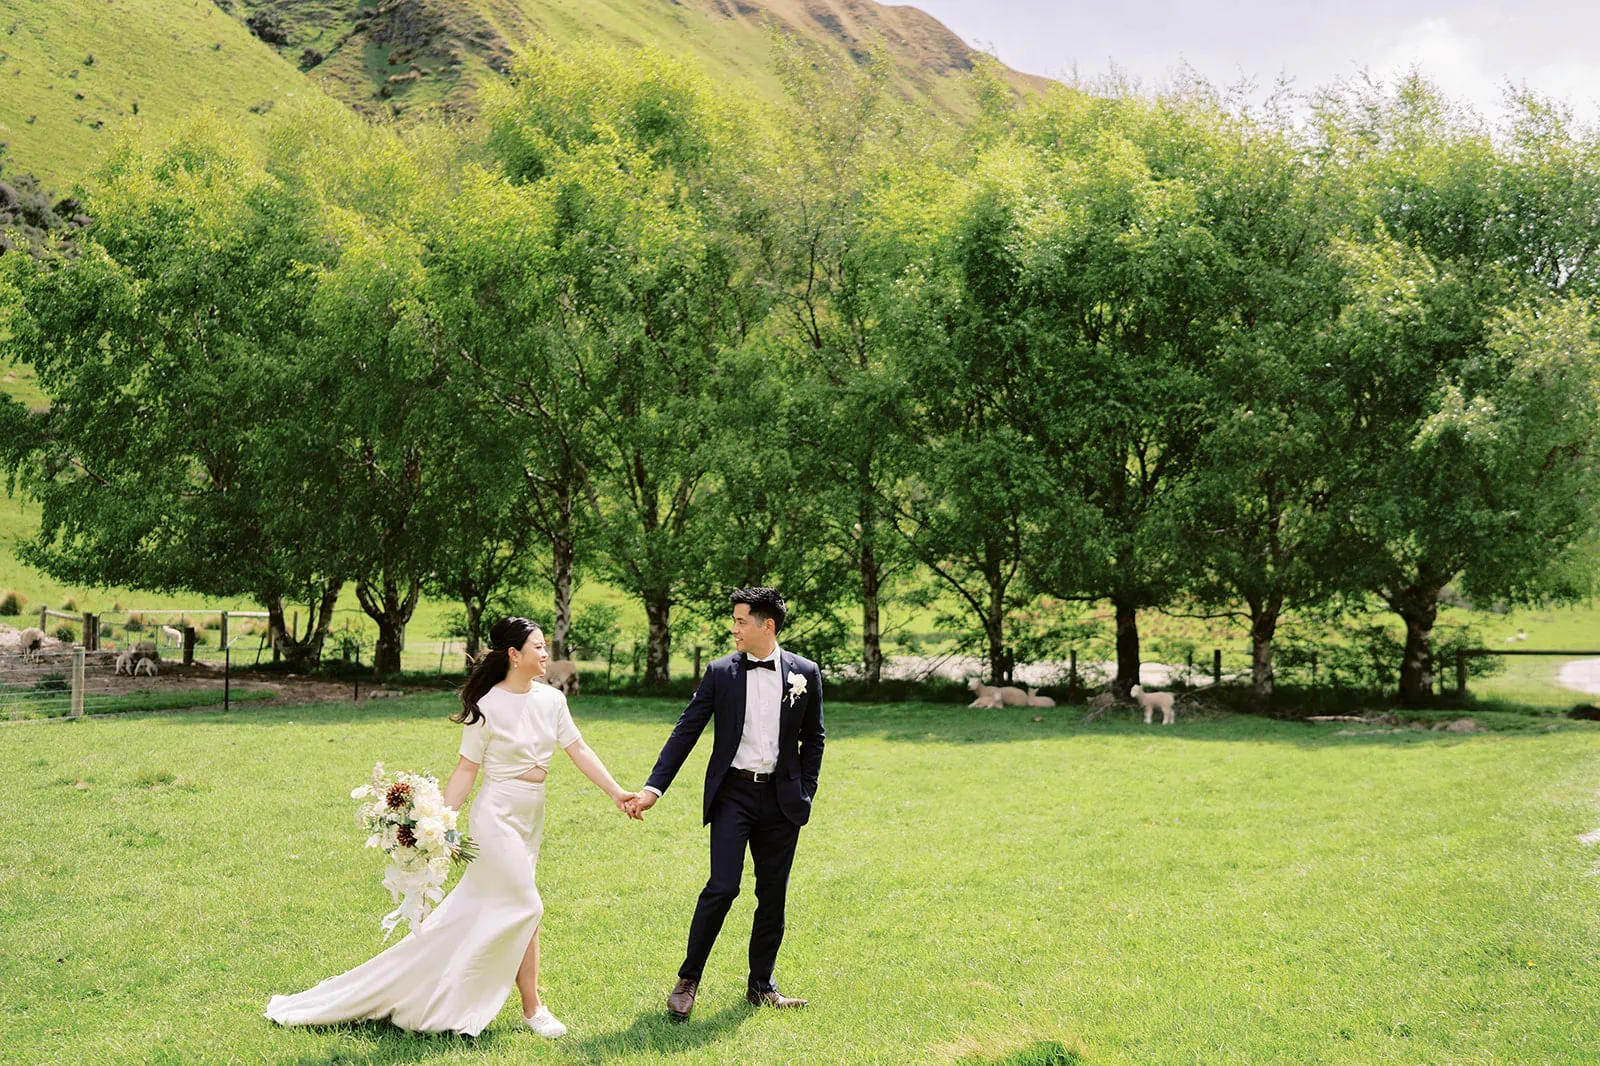 Queenstown Elopement Heli Wedding Photographer クイーンズタウン結婚式 | A pre-wedding photoshoot of a bride and groom standing in a field with mountains in the background.